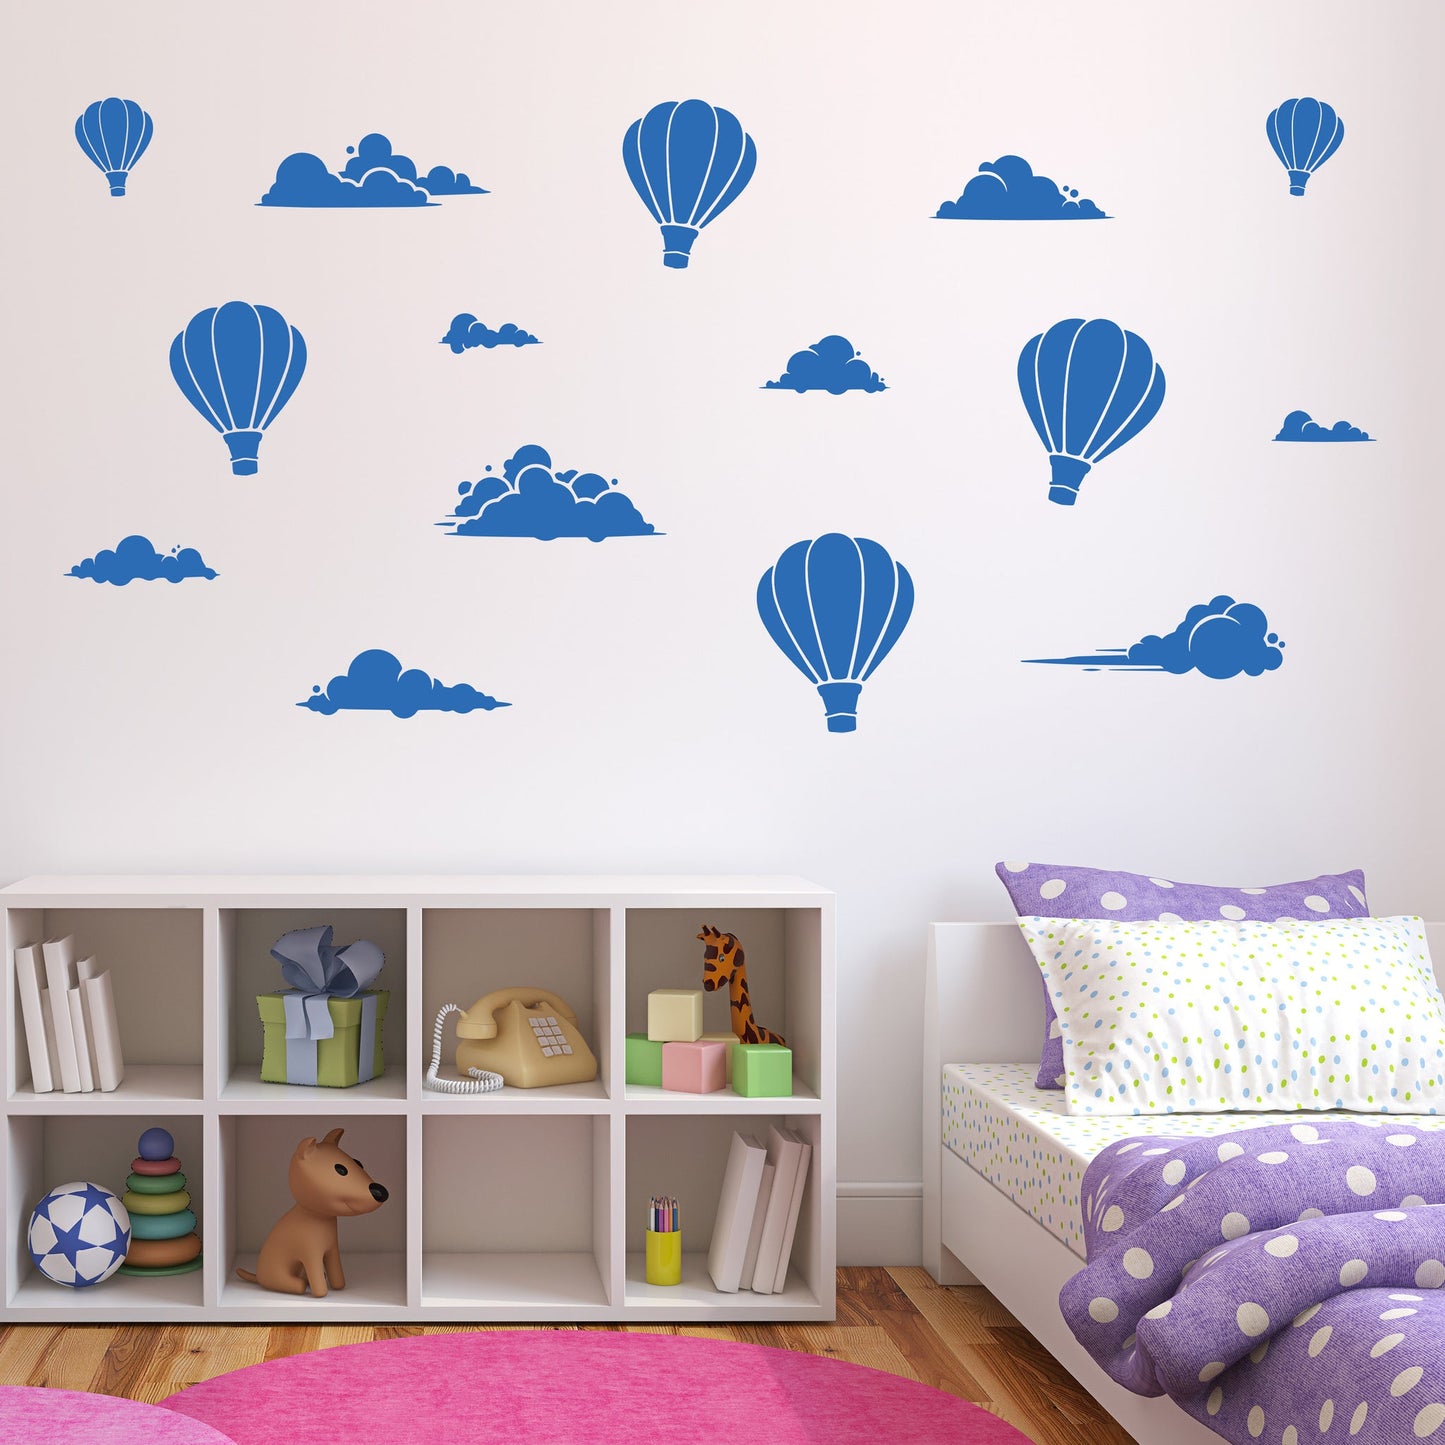 Balloons & Cloud Theme - Wall Decal Sticker Pack - Image 3